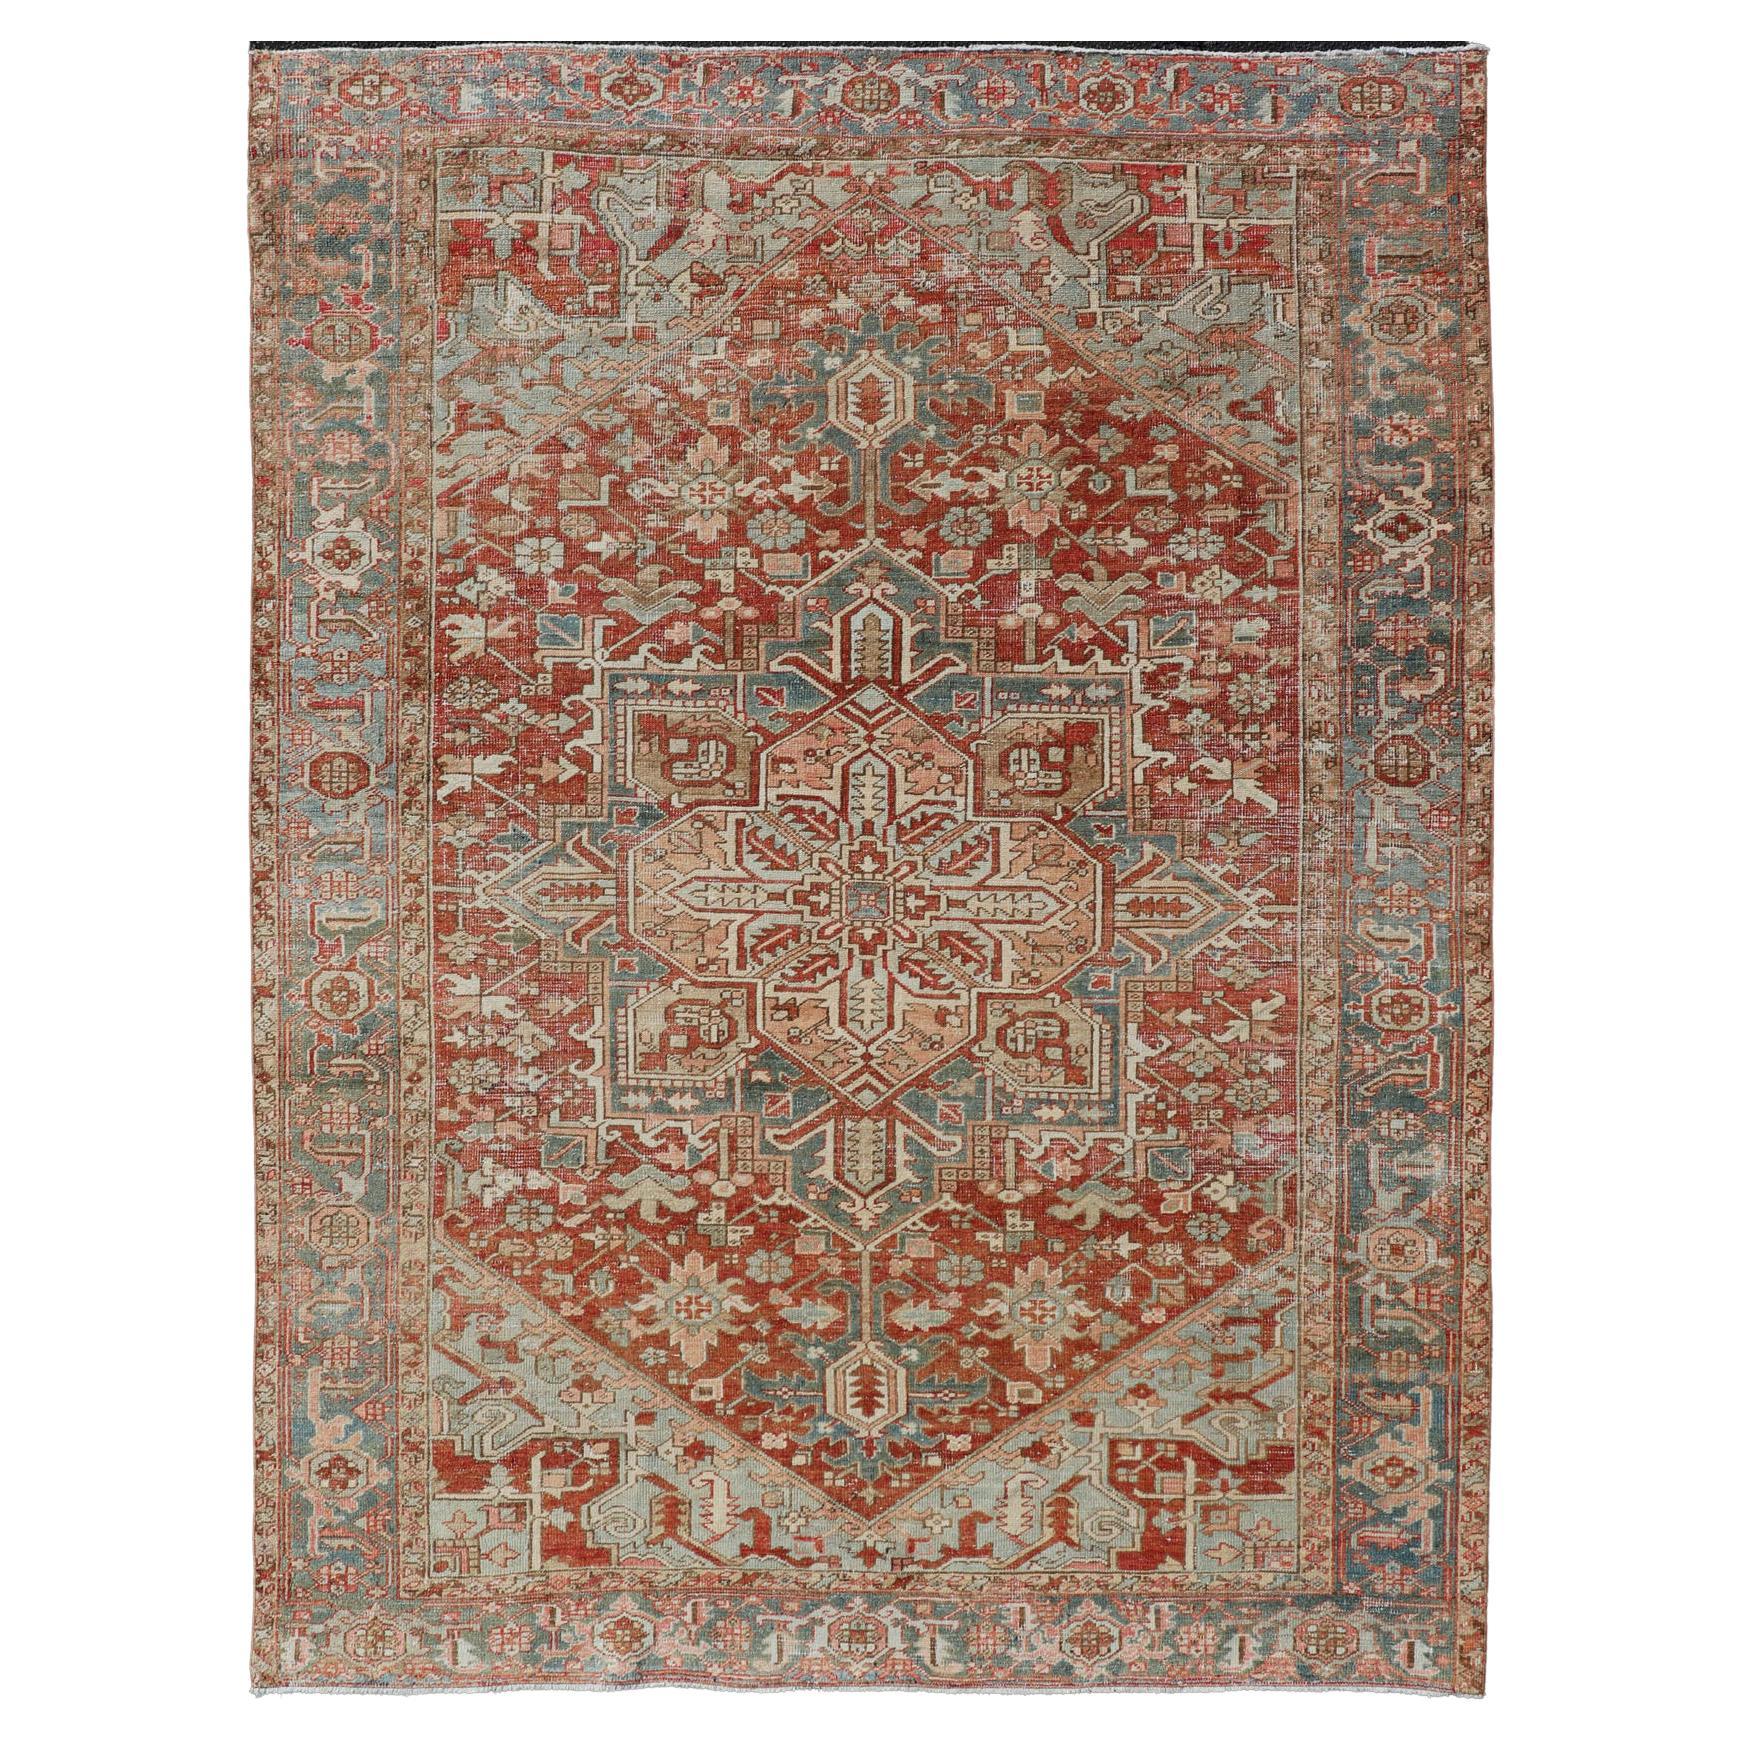 Antique Heriz Rug with All-Over Medallion Design in Red, Blue, Pink, Tan & Brown For Sale